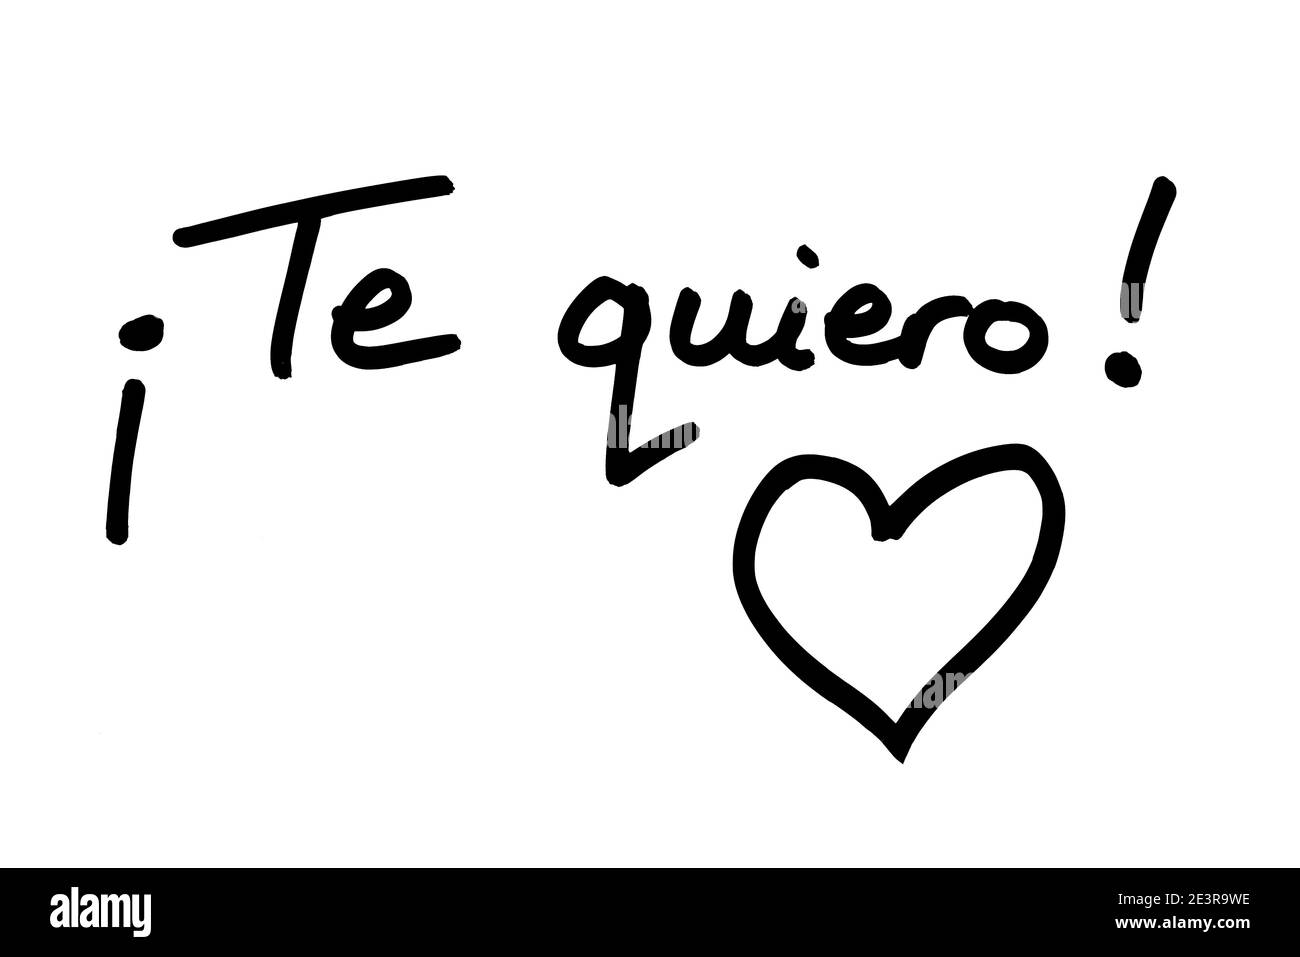 Te quiero! - meaning I Love You, in the Spanish language, with a heart illustration, handwritten on a white background. Stock Photo